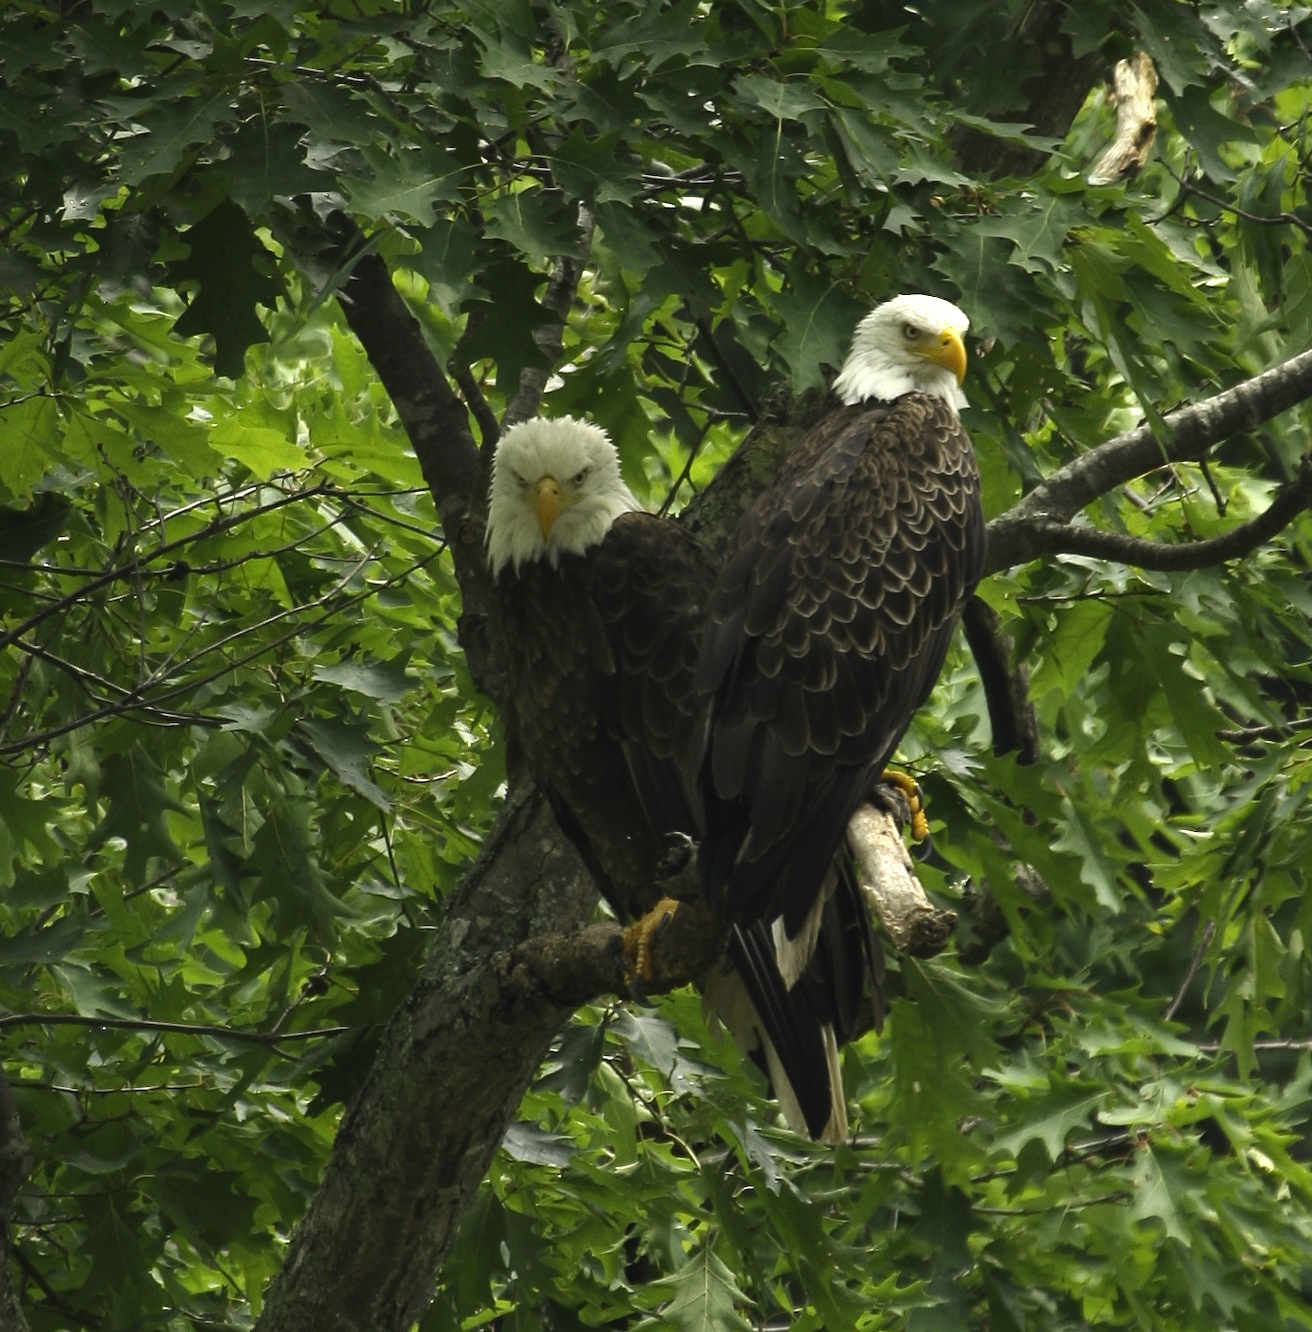 Views of spectacular wildlife such as these bald eagles are a regular occurrence in Grant County.